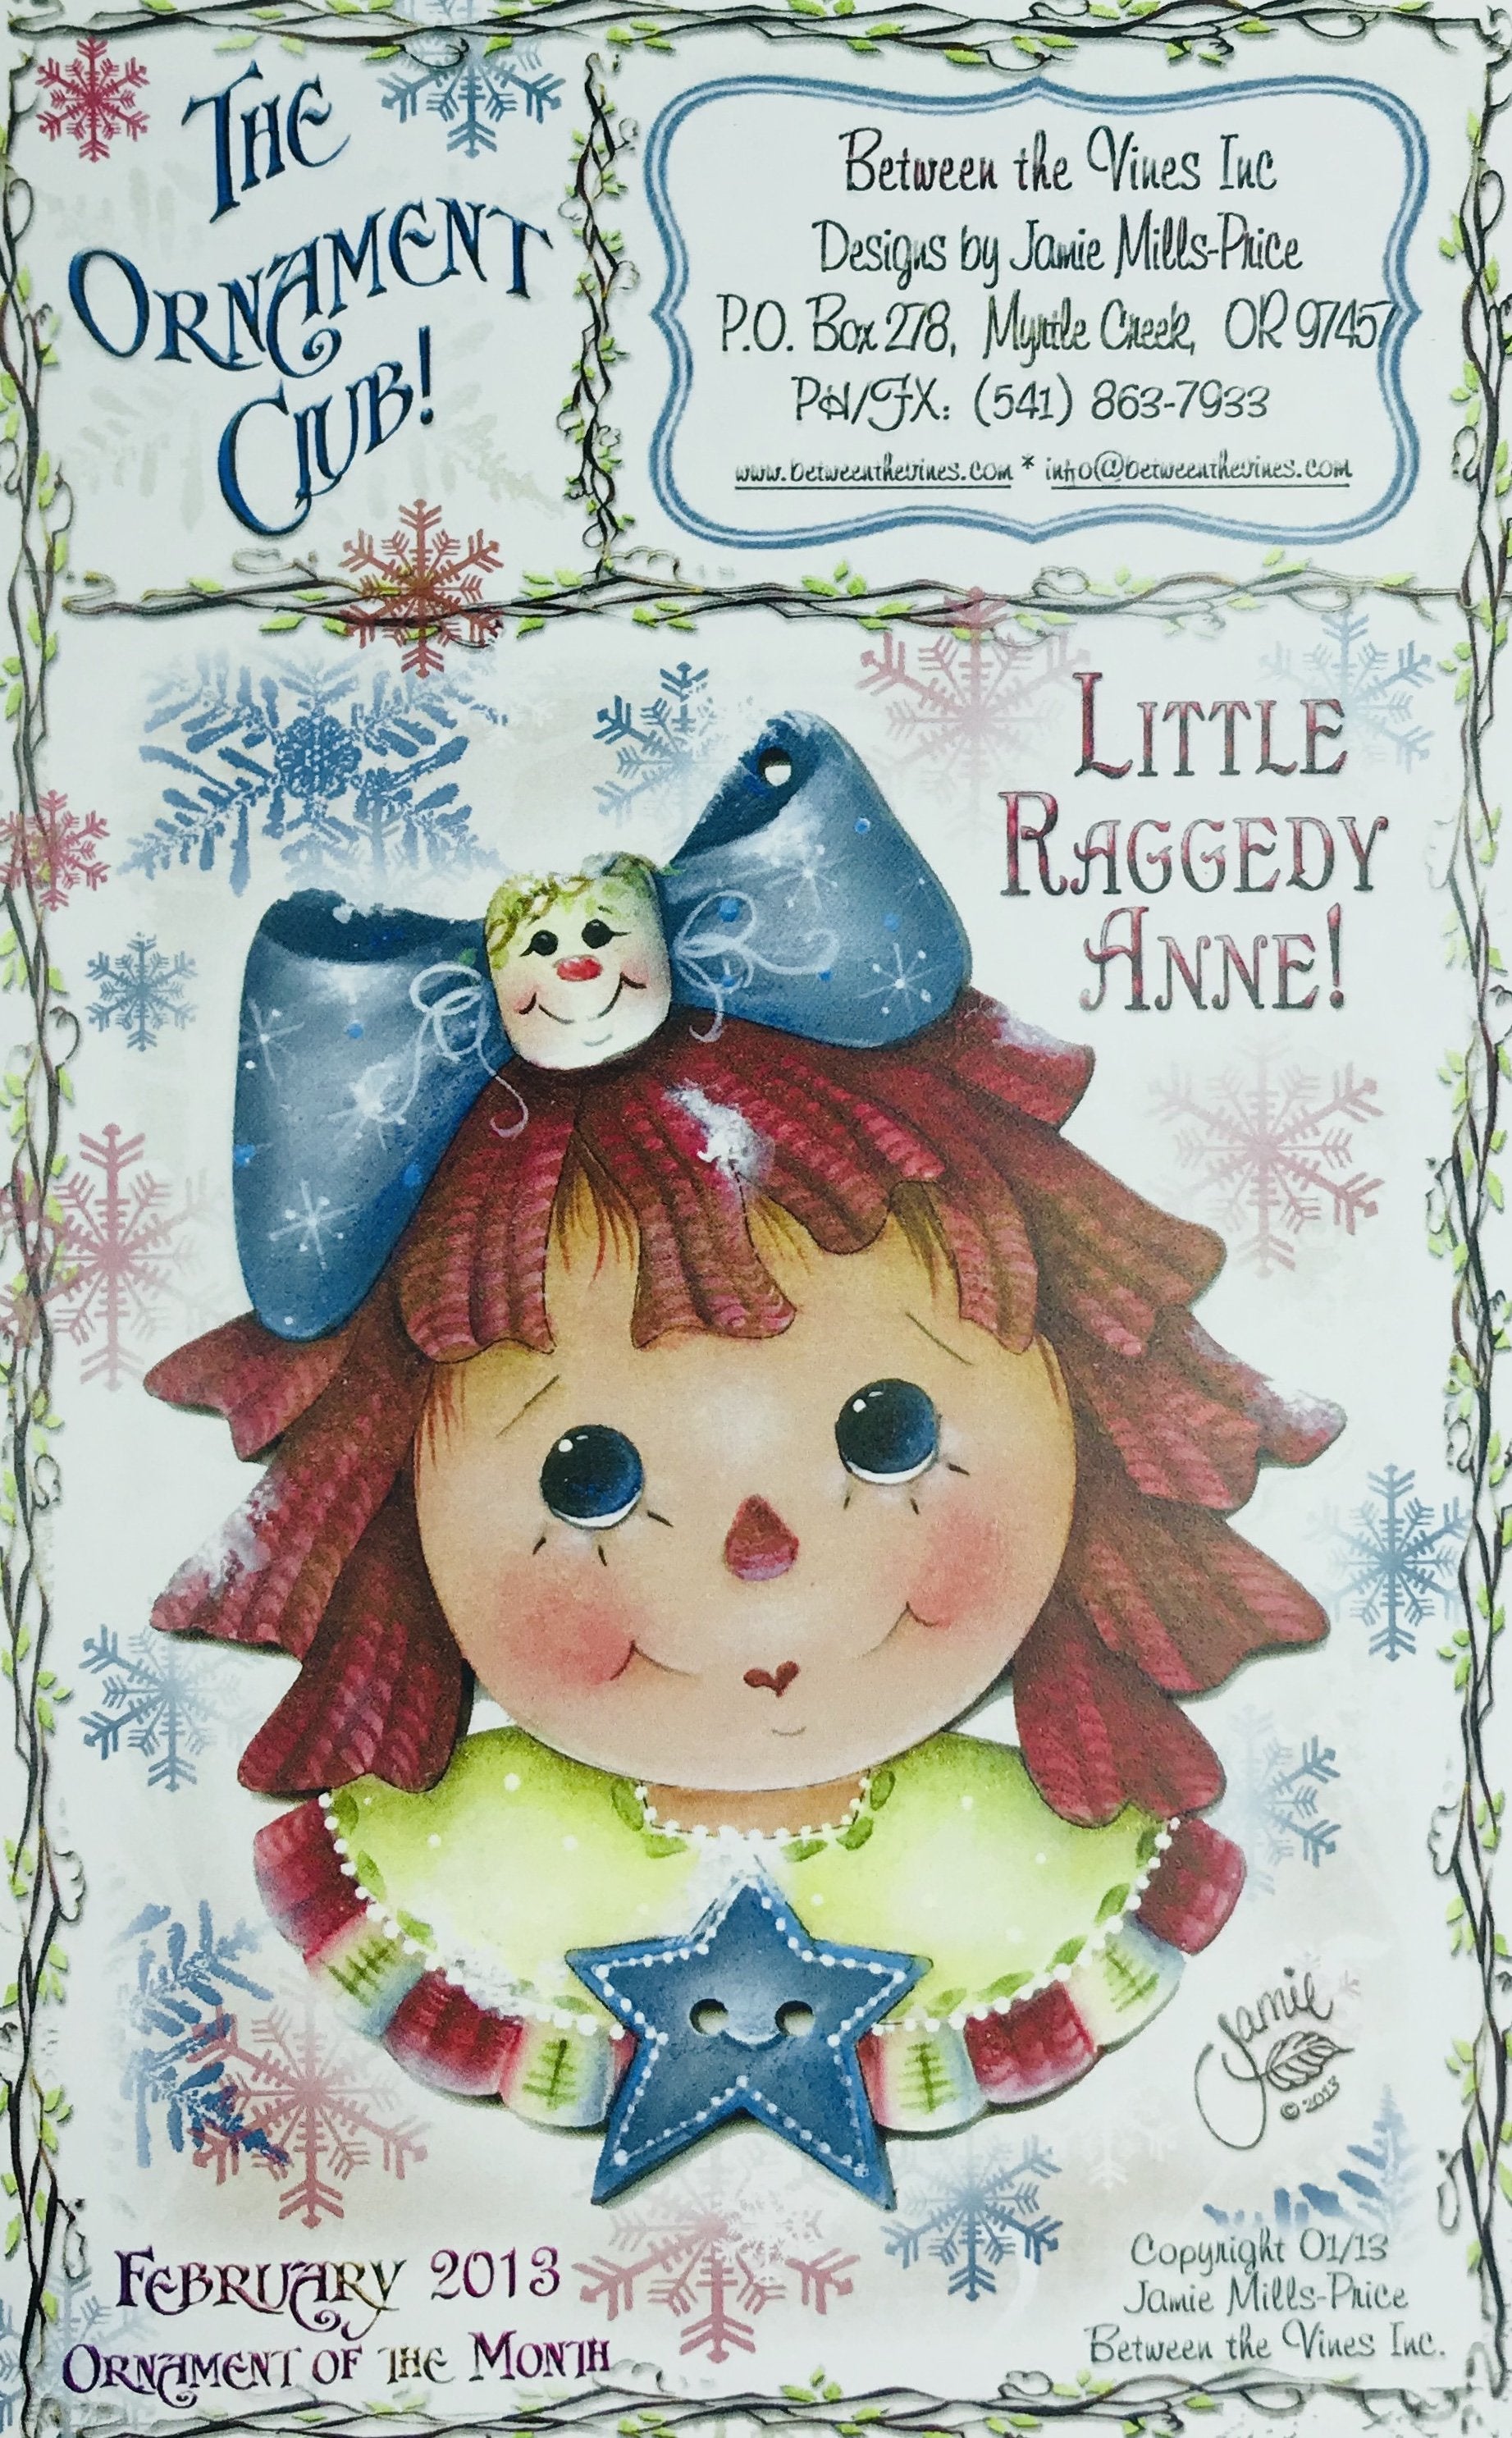 Little raggedy Anne - Out of the Wood